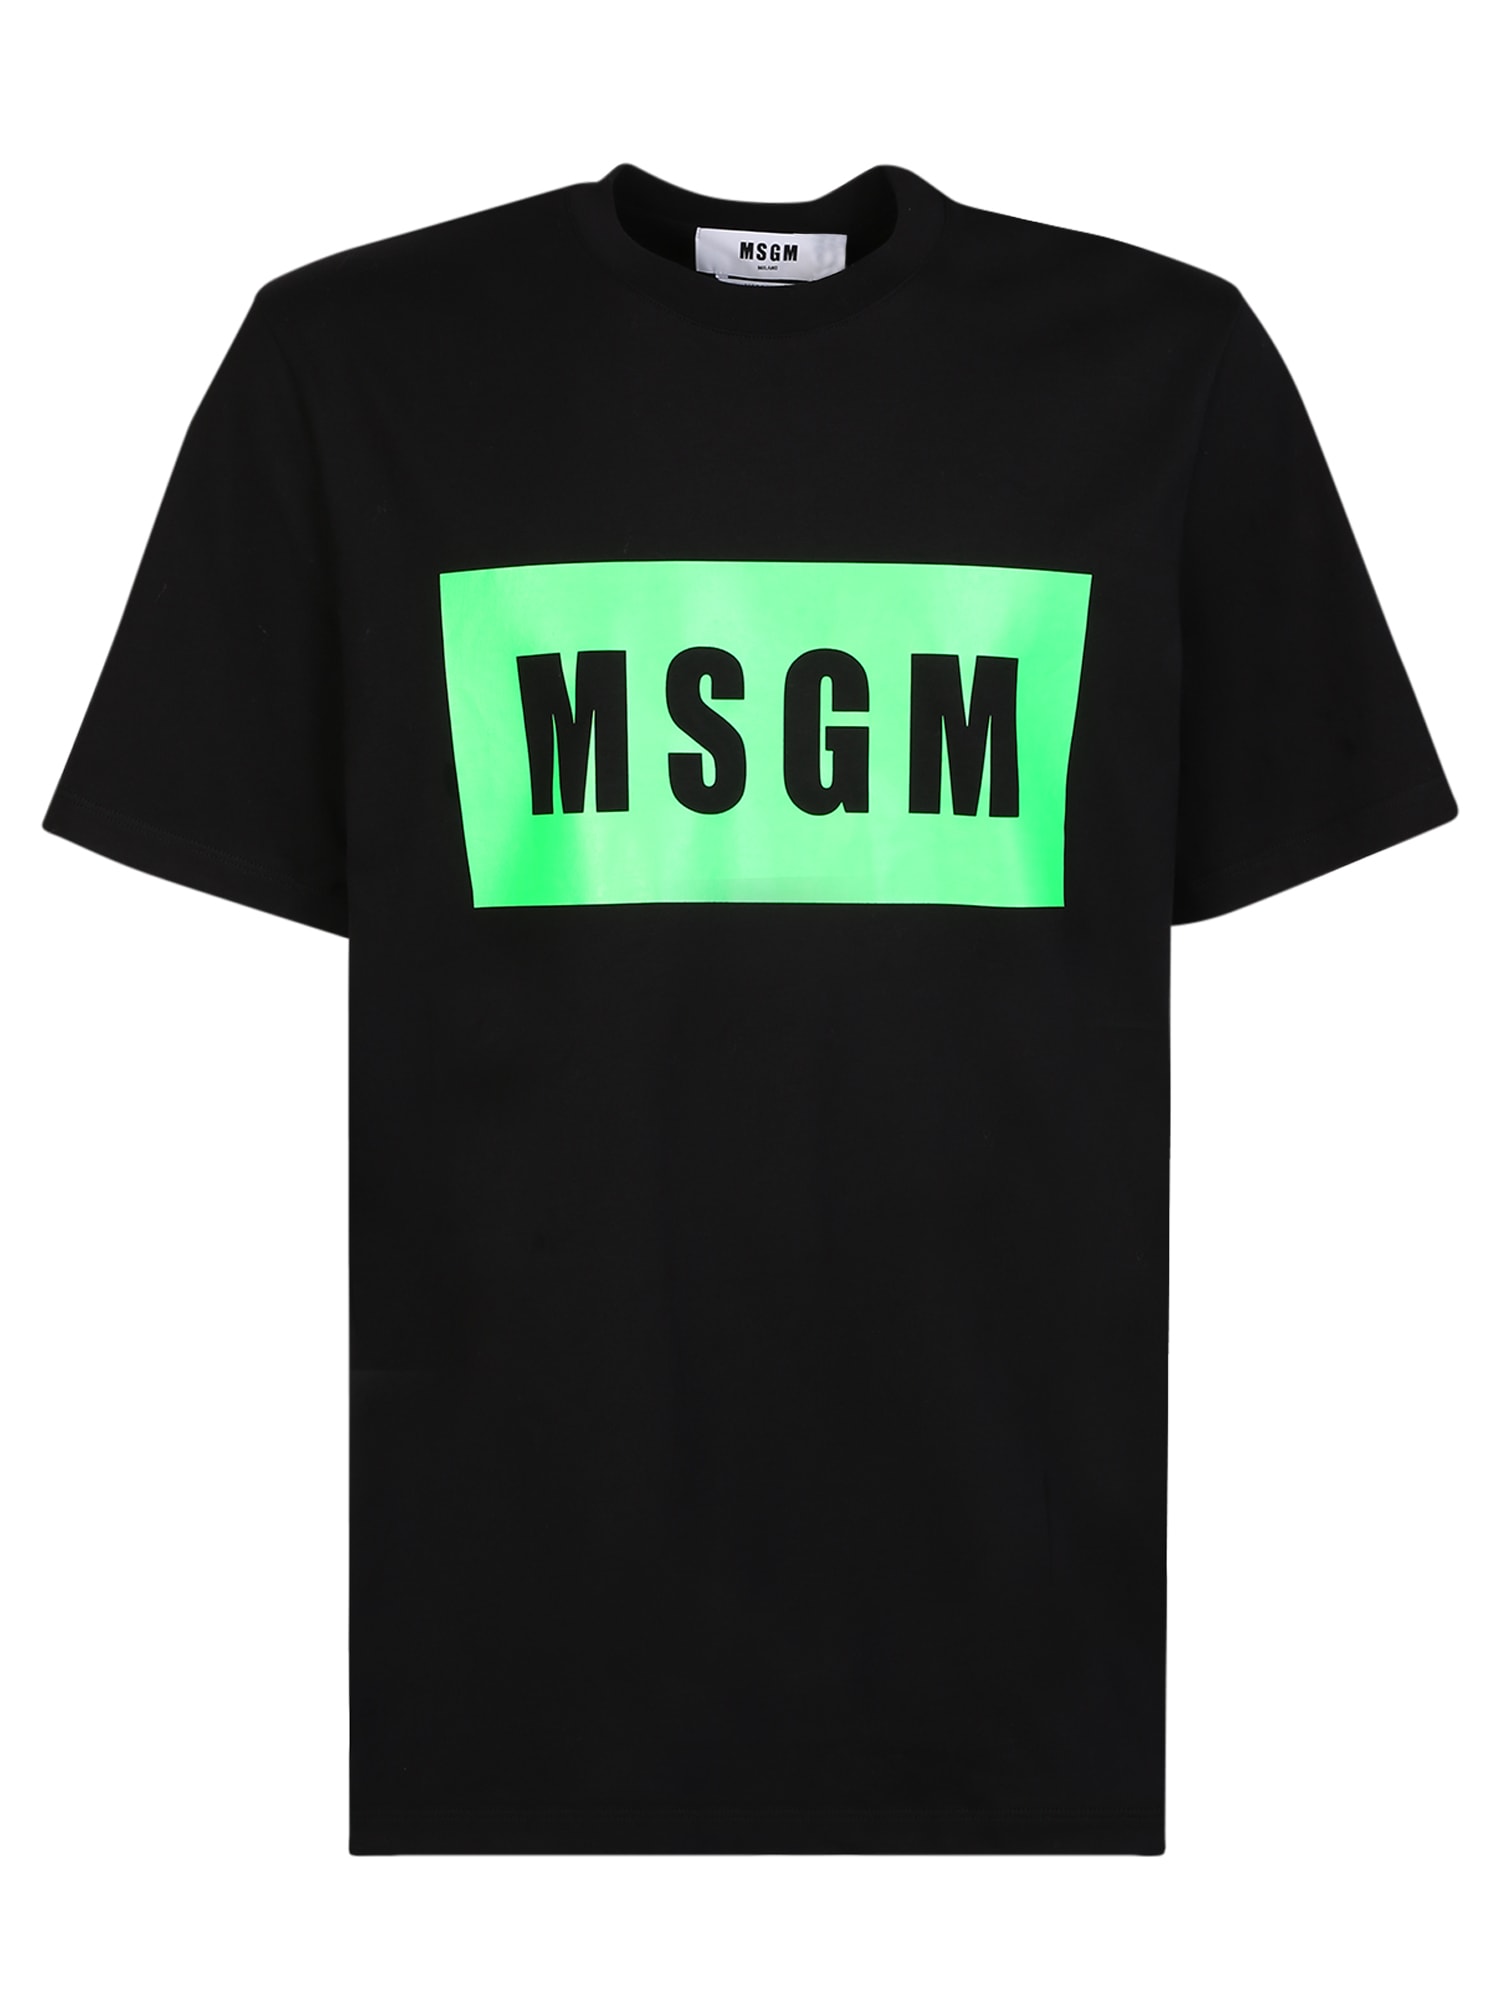 MSGM Logo T-shirt. Simple But Characteristic Of The Brand Thanks To The Use Of Bold Colors